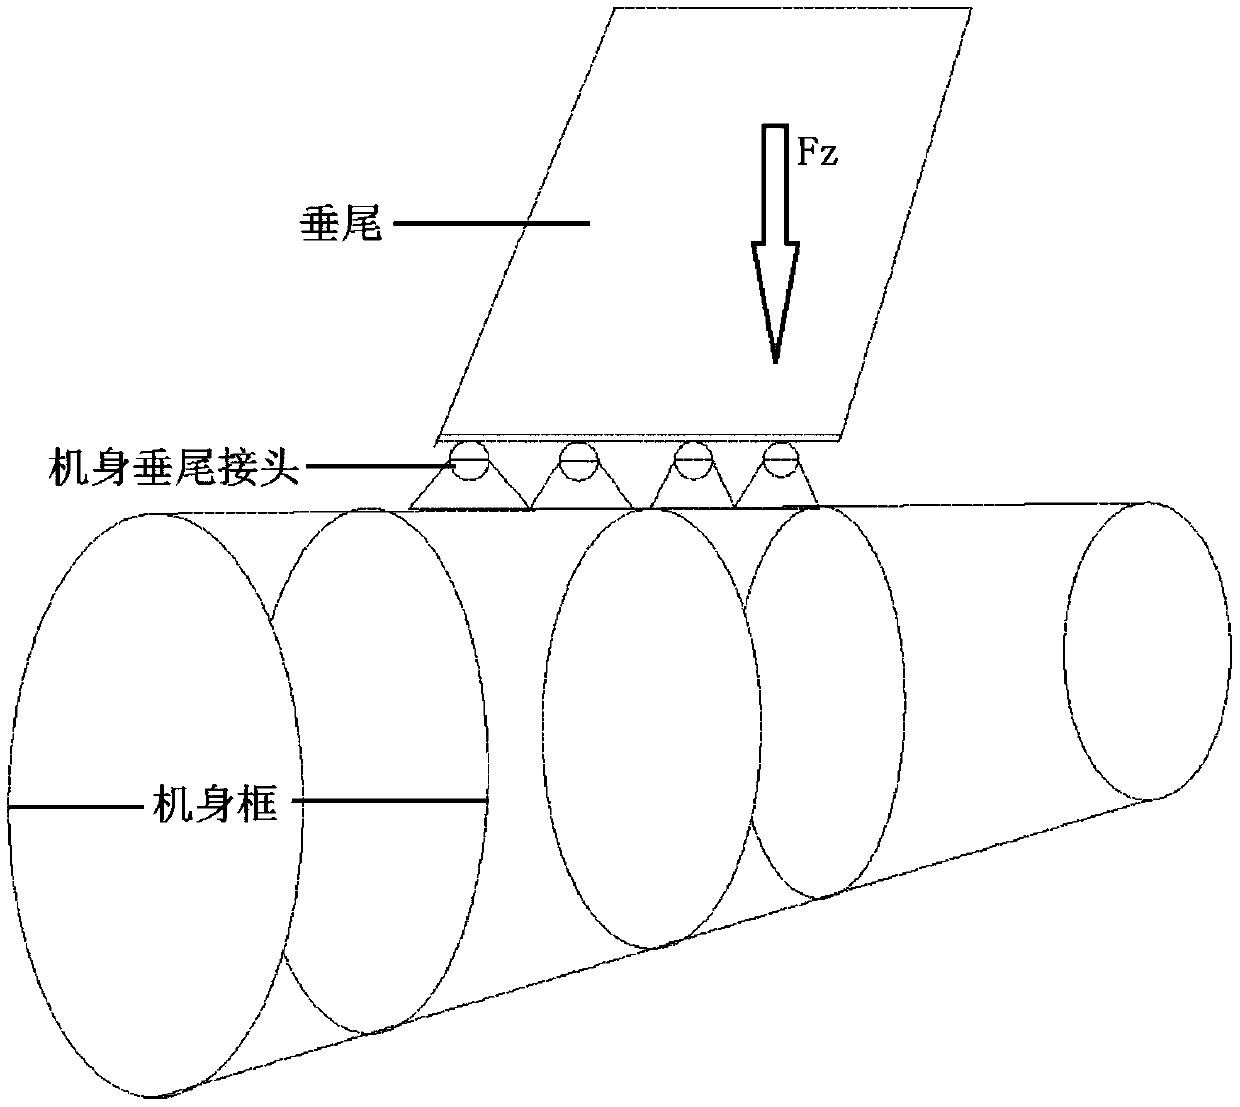 Loading design method for high vertical fin vertical load of full-scale fatigue test